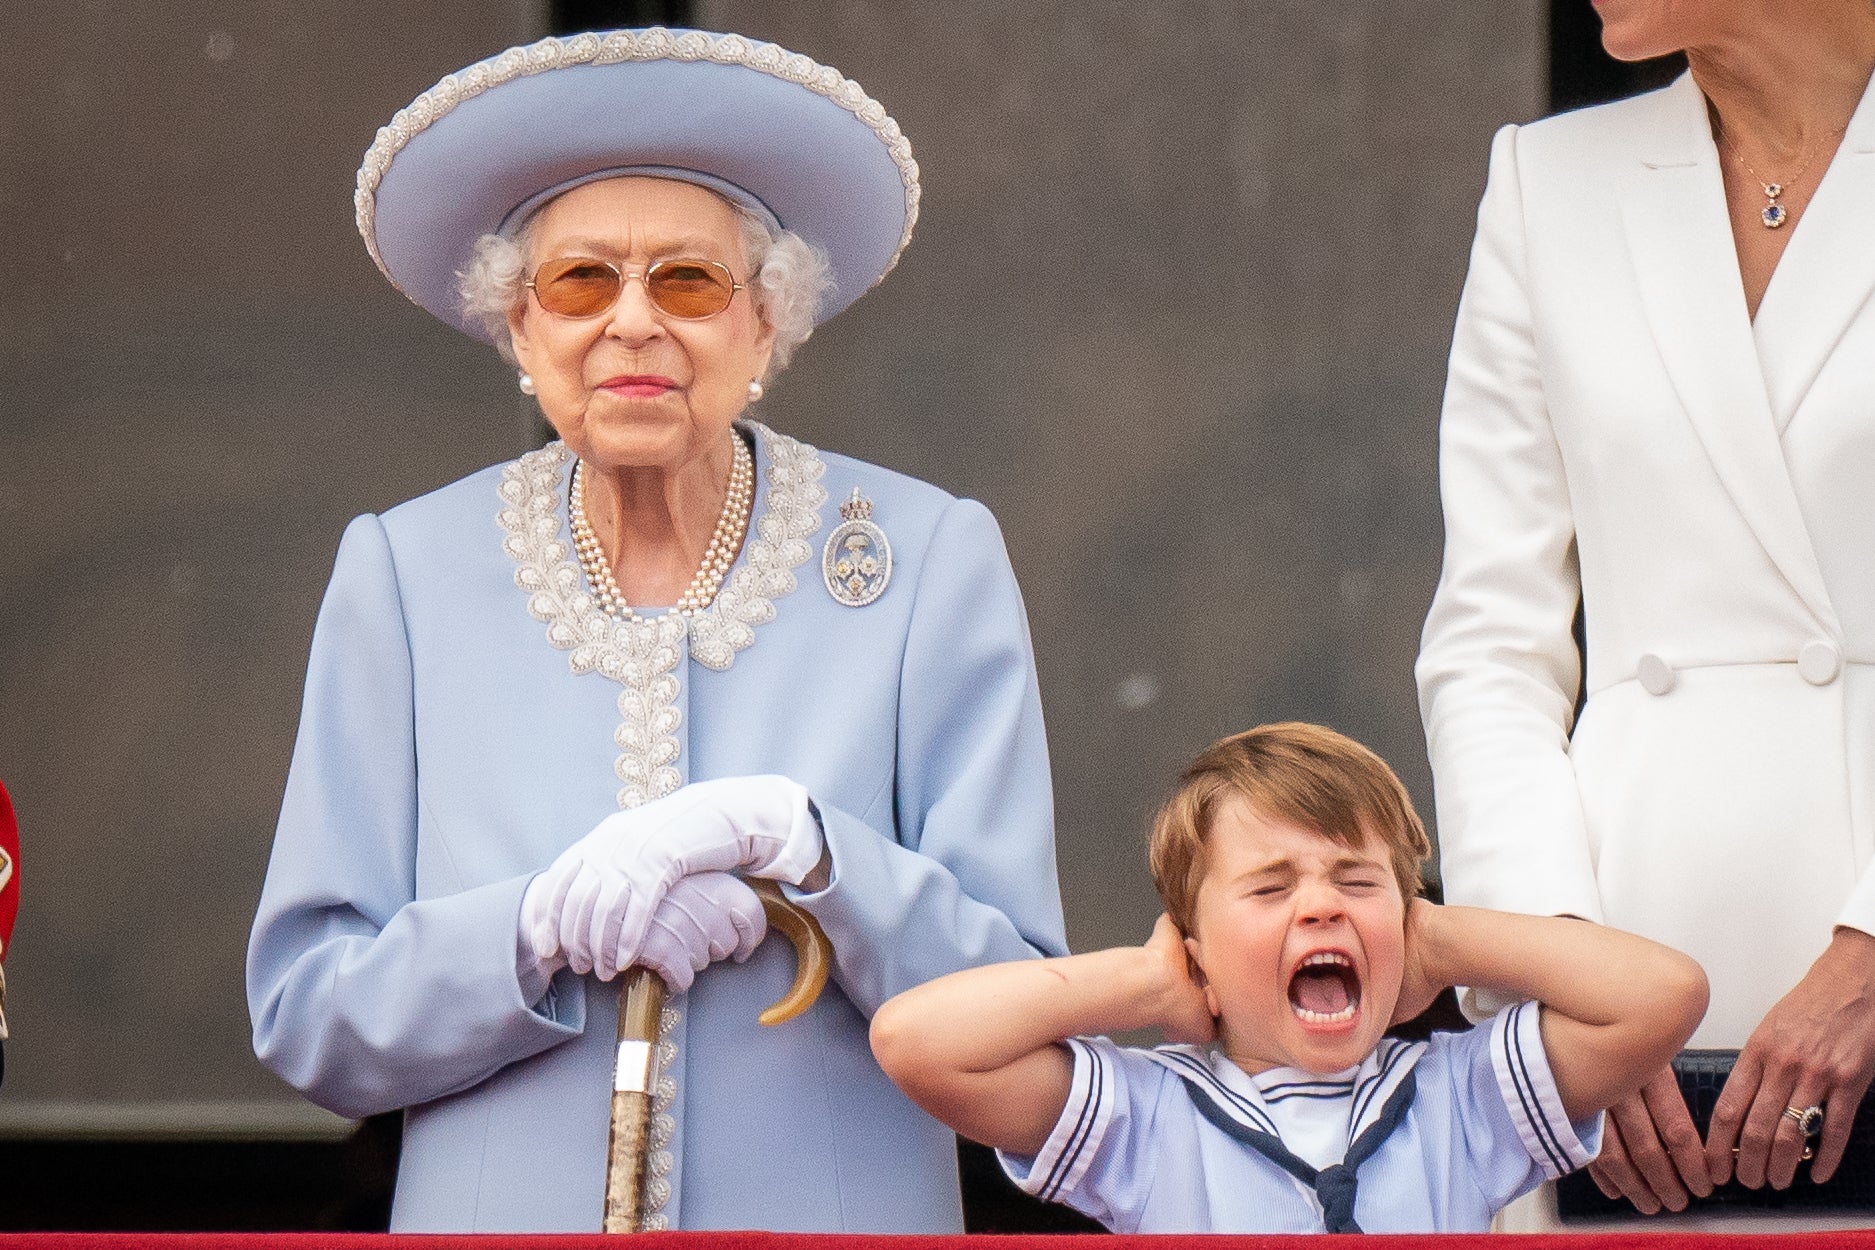 Prince Louis on the Palace balcony with the Queen during the Platinum Jubilee celebrations (Aaron Chown/PA)